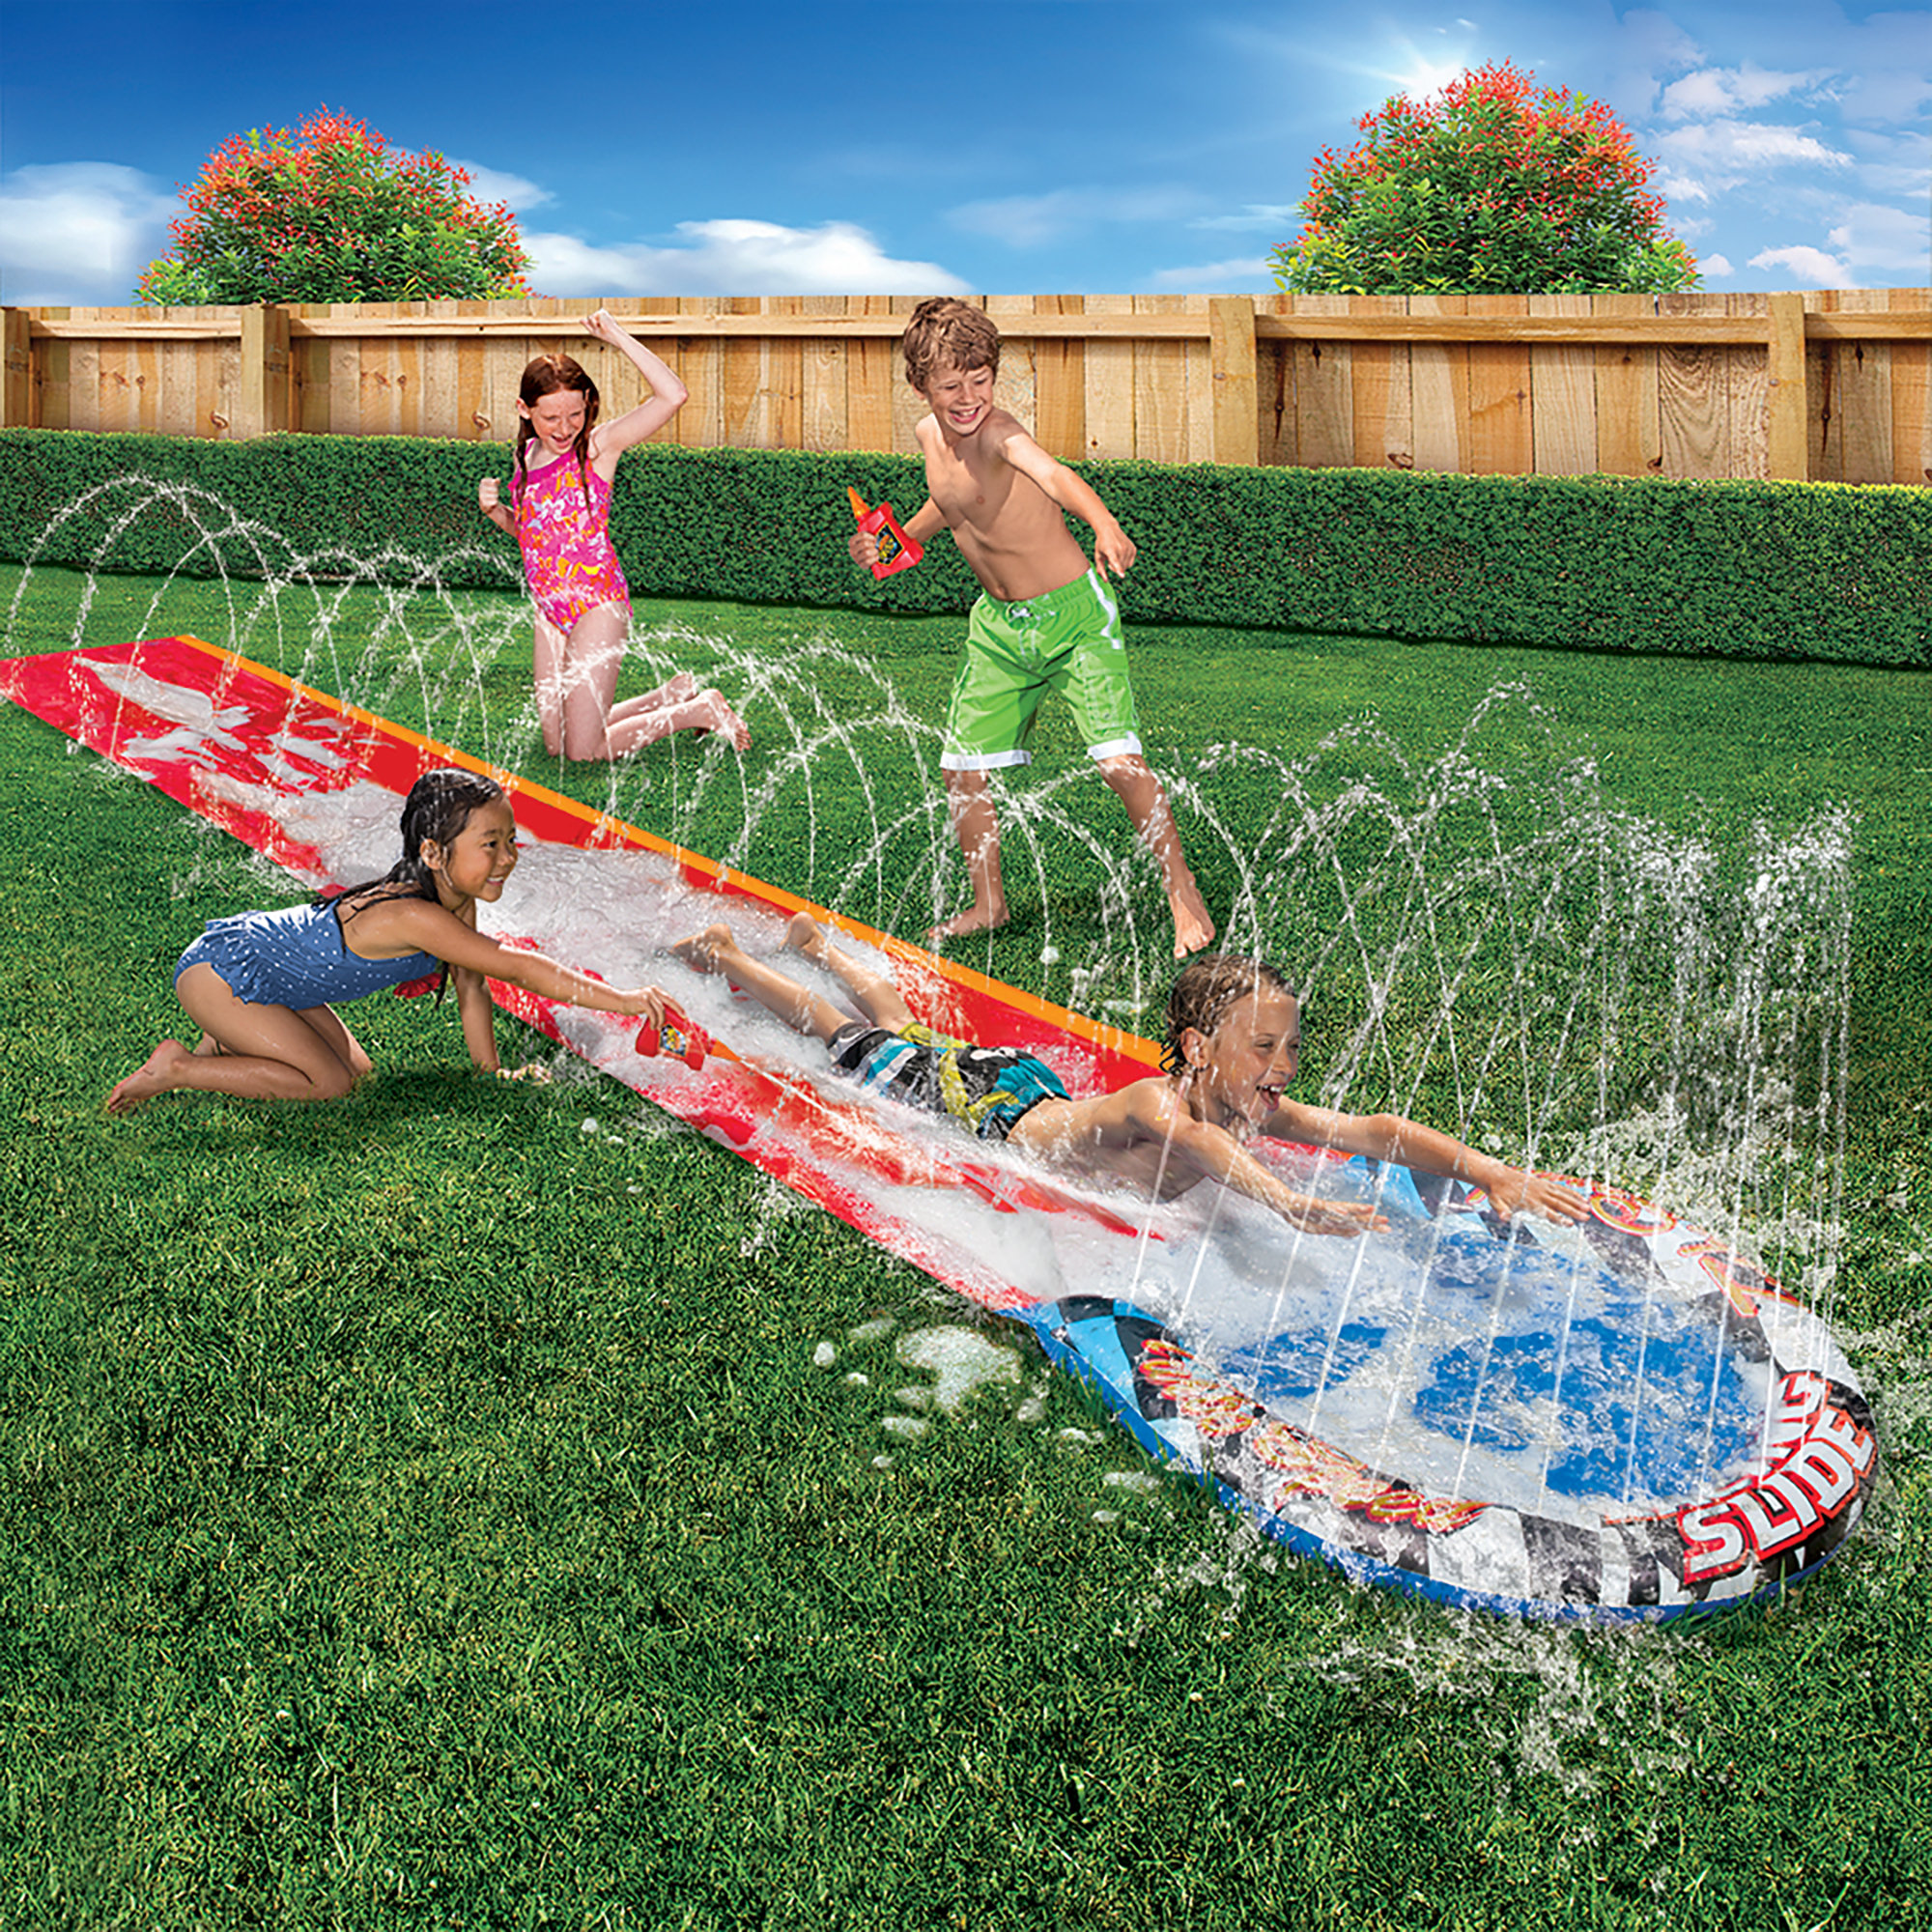 Banzai Turbo Speed Inflatable Racing Slide W/ Slick Tech Solution, 17 ft x 28 in, Children 5+ years - image 4 of 4